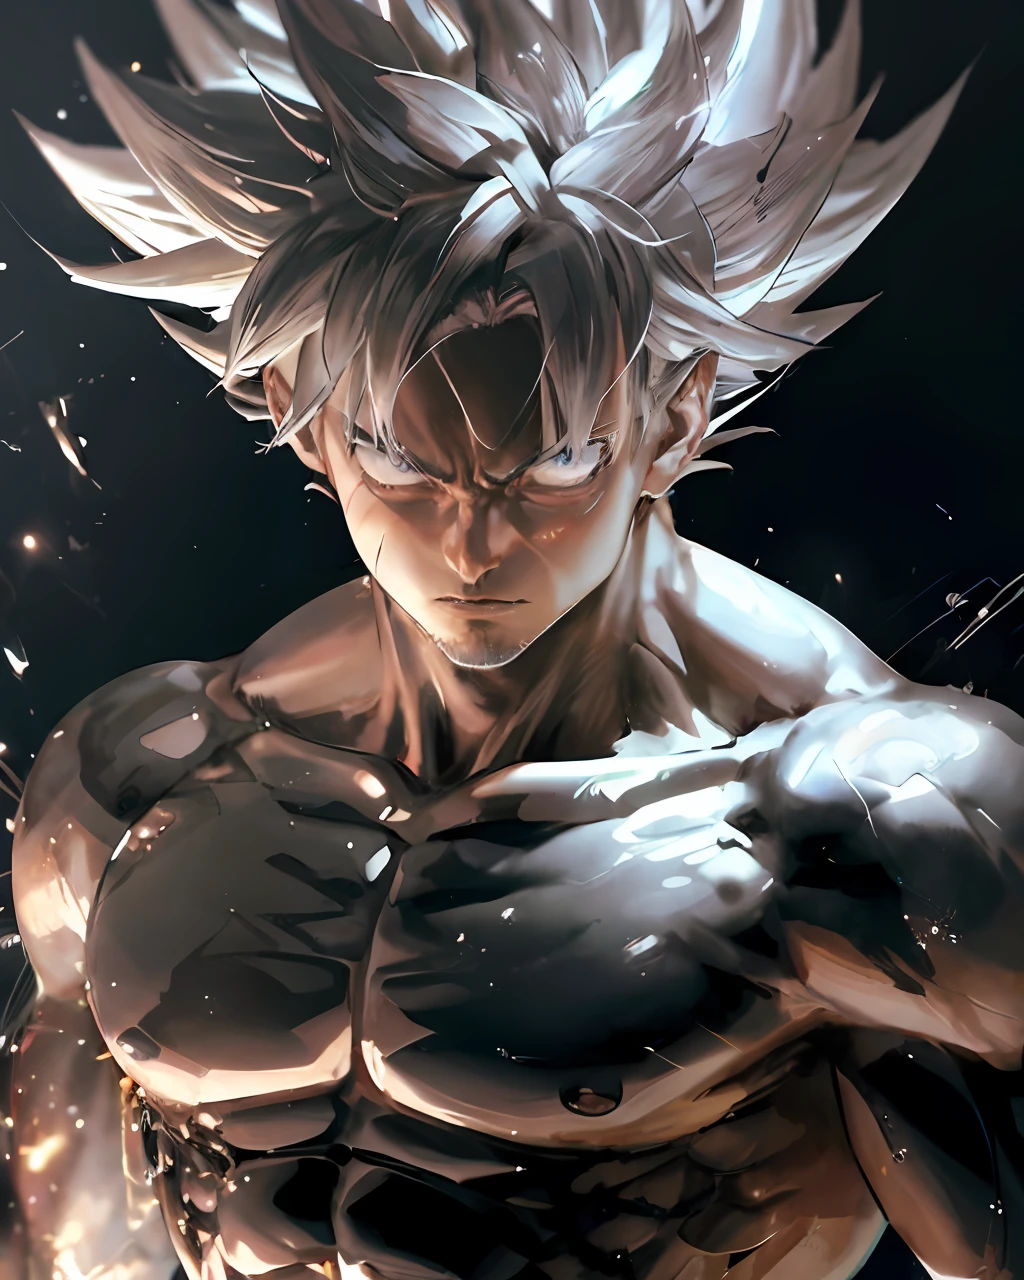 a close up of a man with a fist in his hand, ultra instinct, 4 k manga wallpaper, highly detailed portrait of goku, photorealistic human goku, 4k anime wallpaper, an epic anime of a energy man, human goku, portrait of goku, goku portrait, anime style 4 k, son goku, anime wallpaper 4 k, anime wallpaper 4k, broly